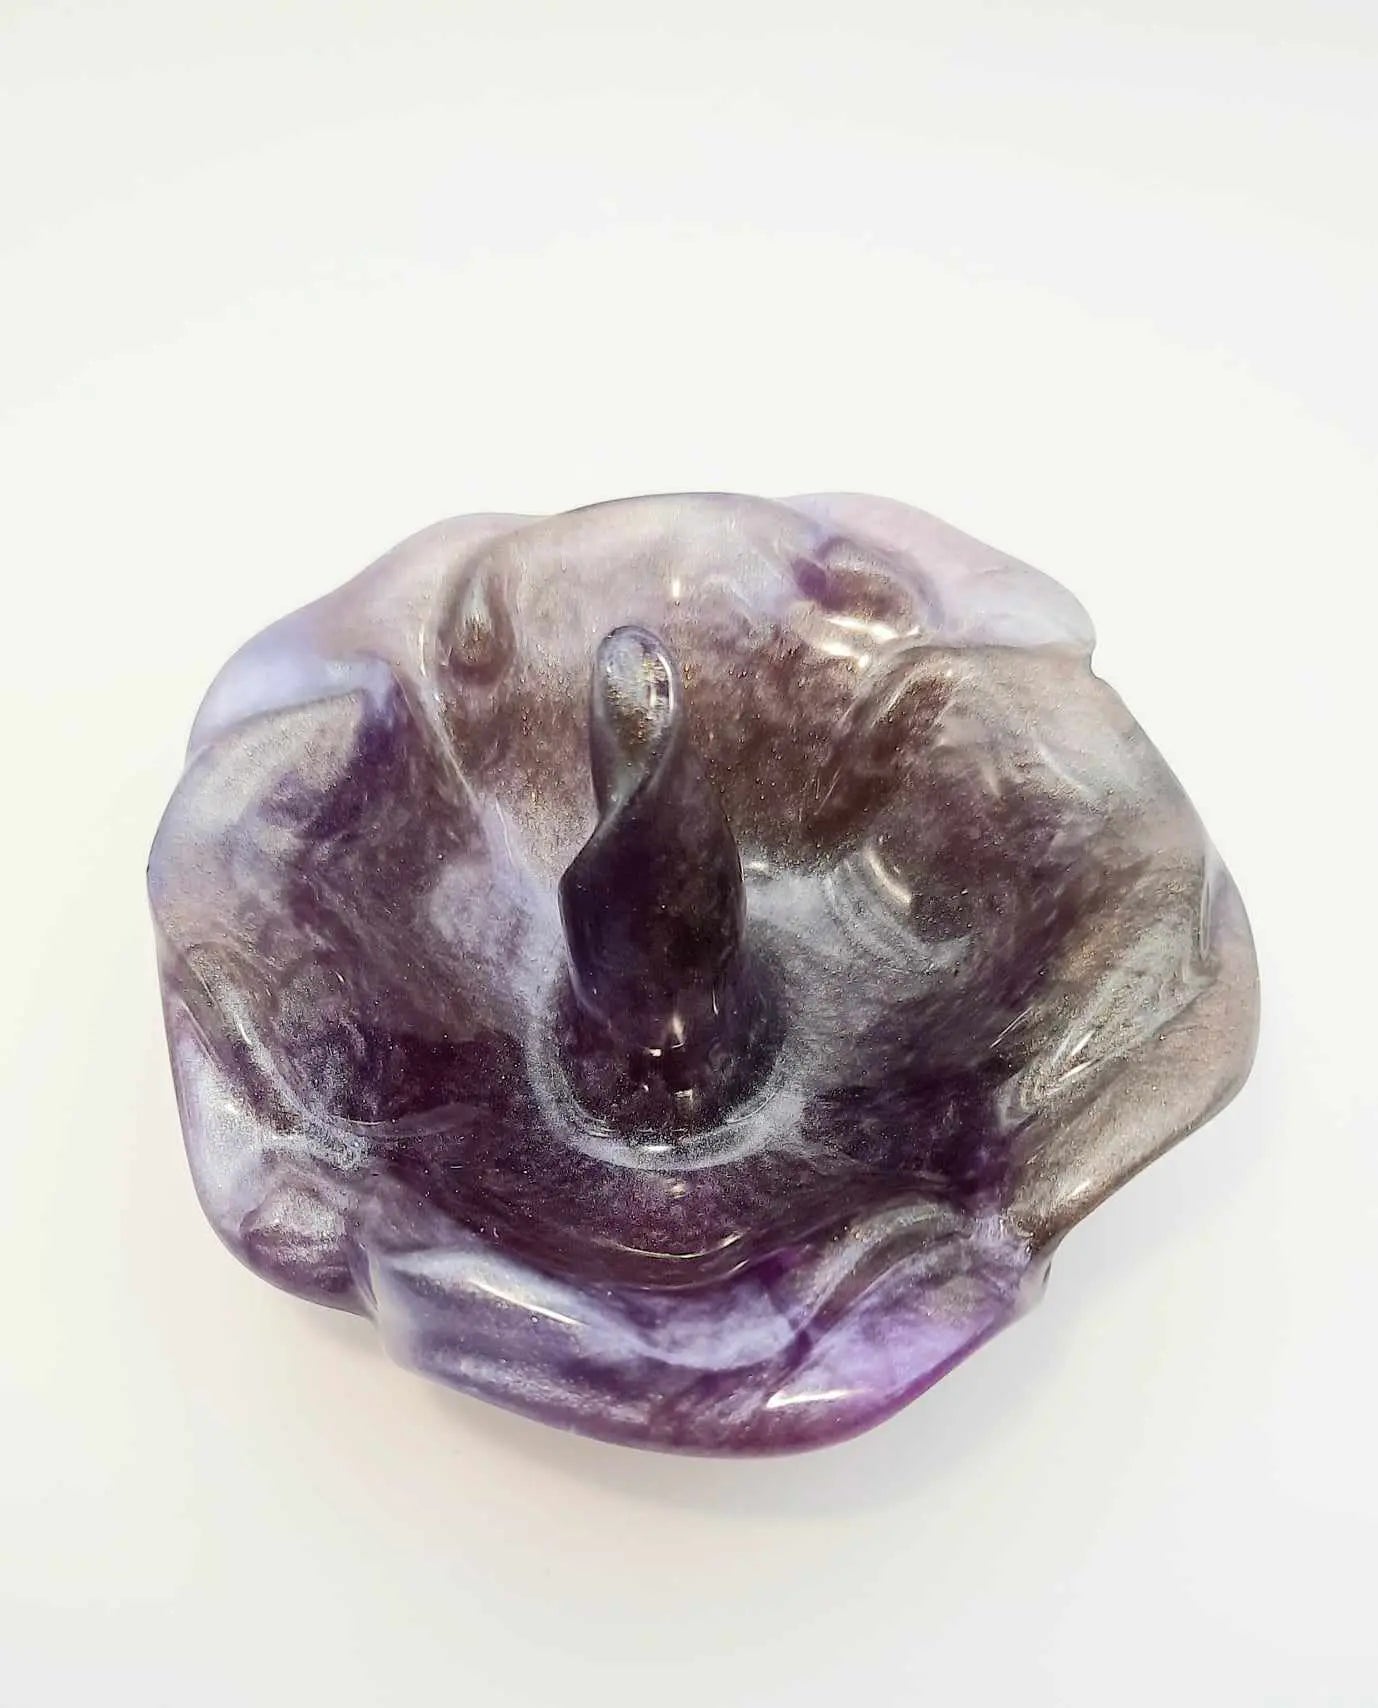 Marbled purple ring dish resin accessories - Image #1